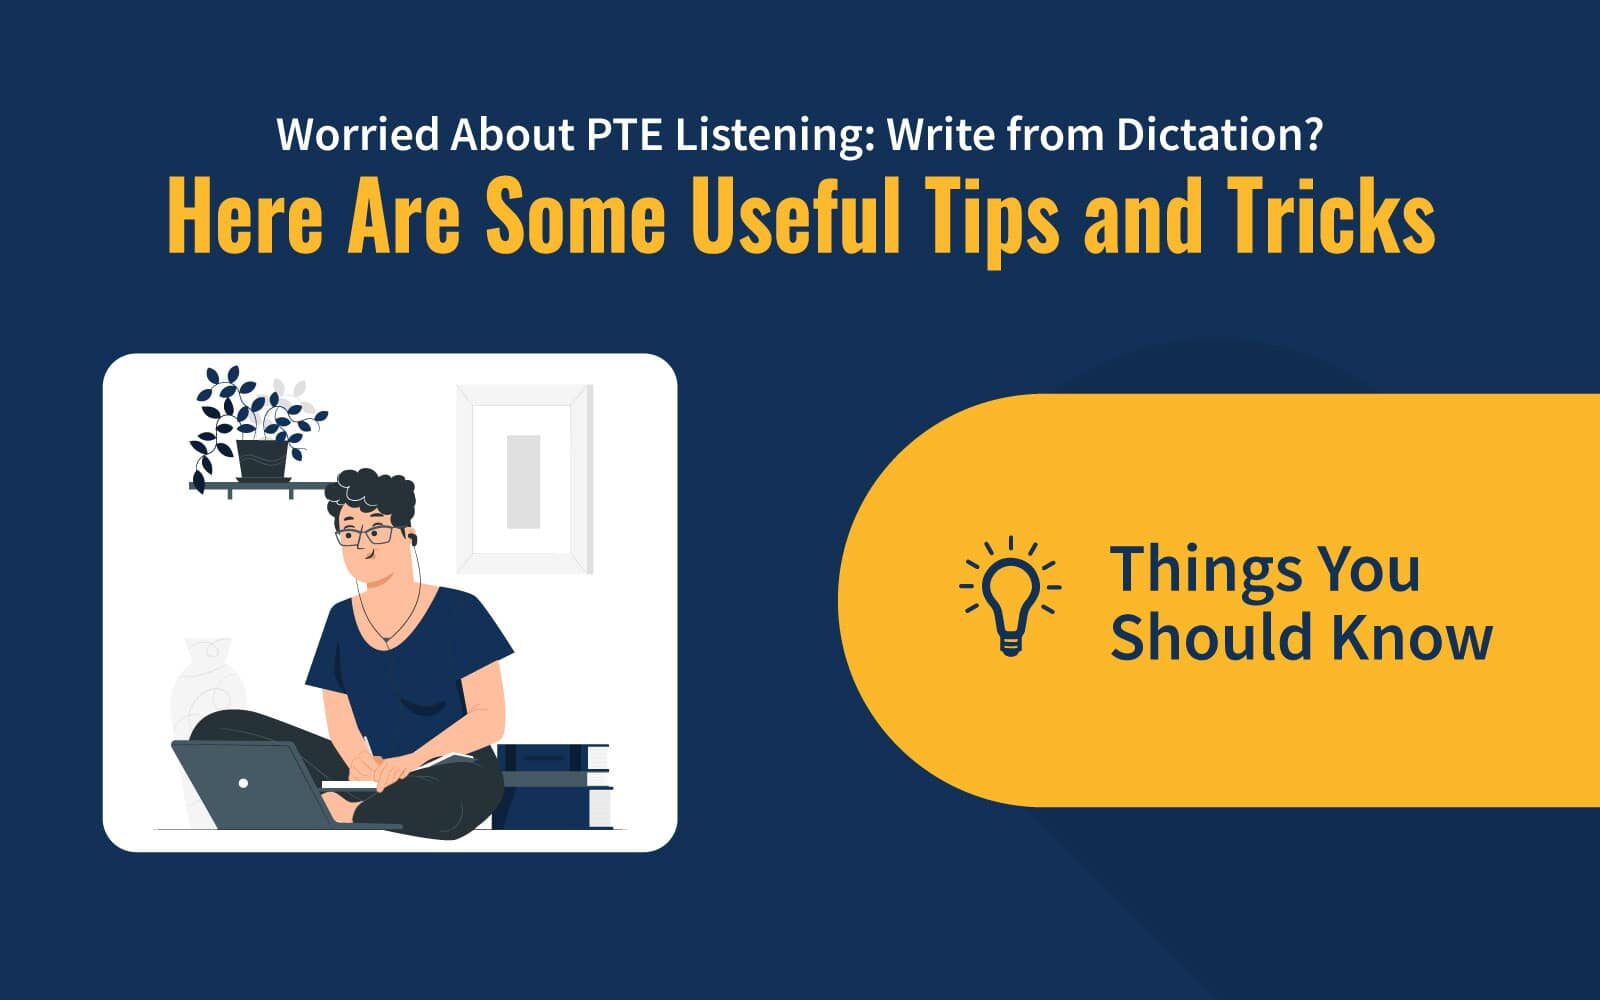 Worried About PTE Listening: Write from Dictation? Here Are Some Useful Tips and Tricks image